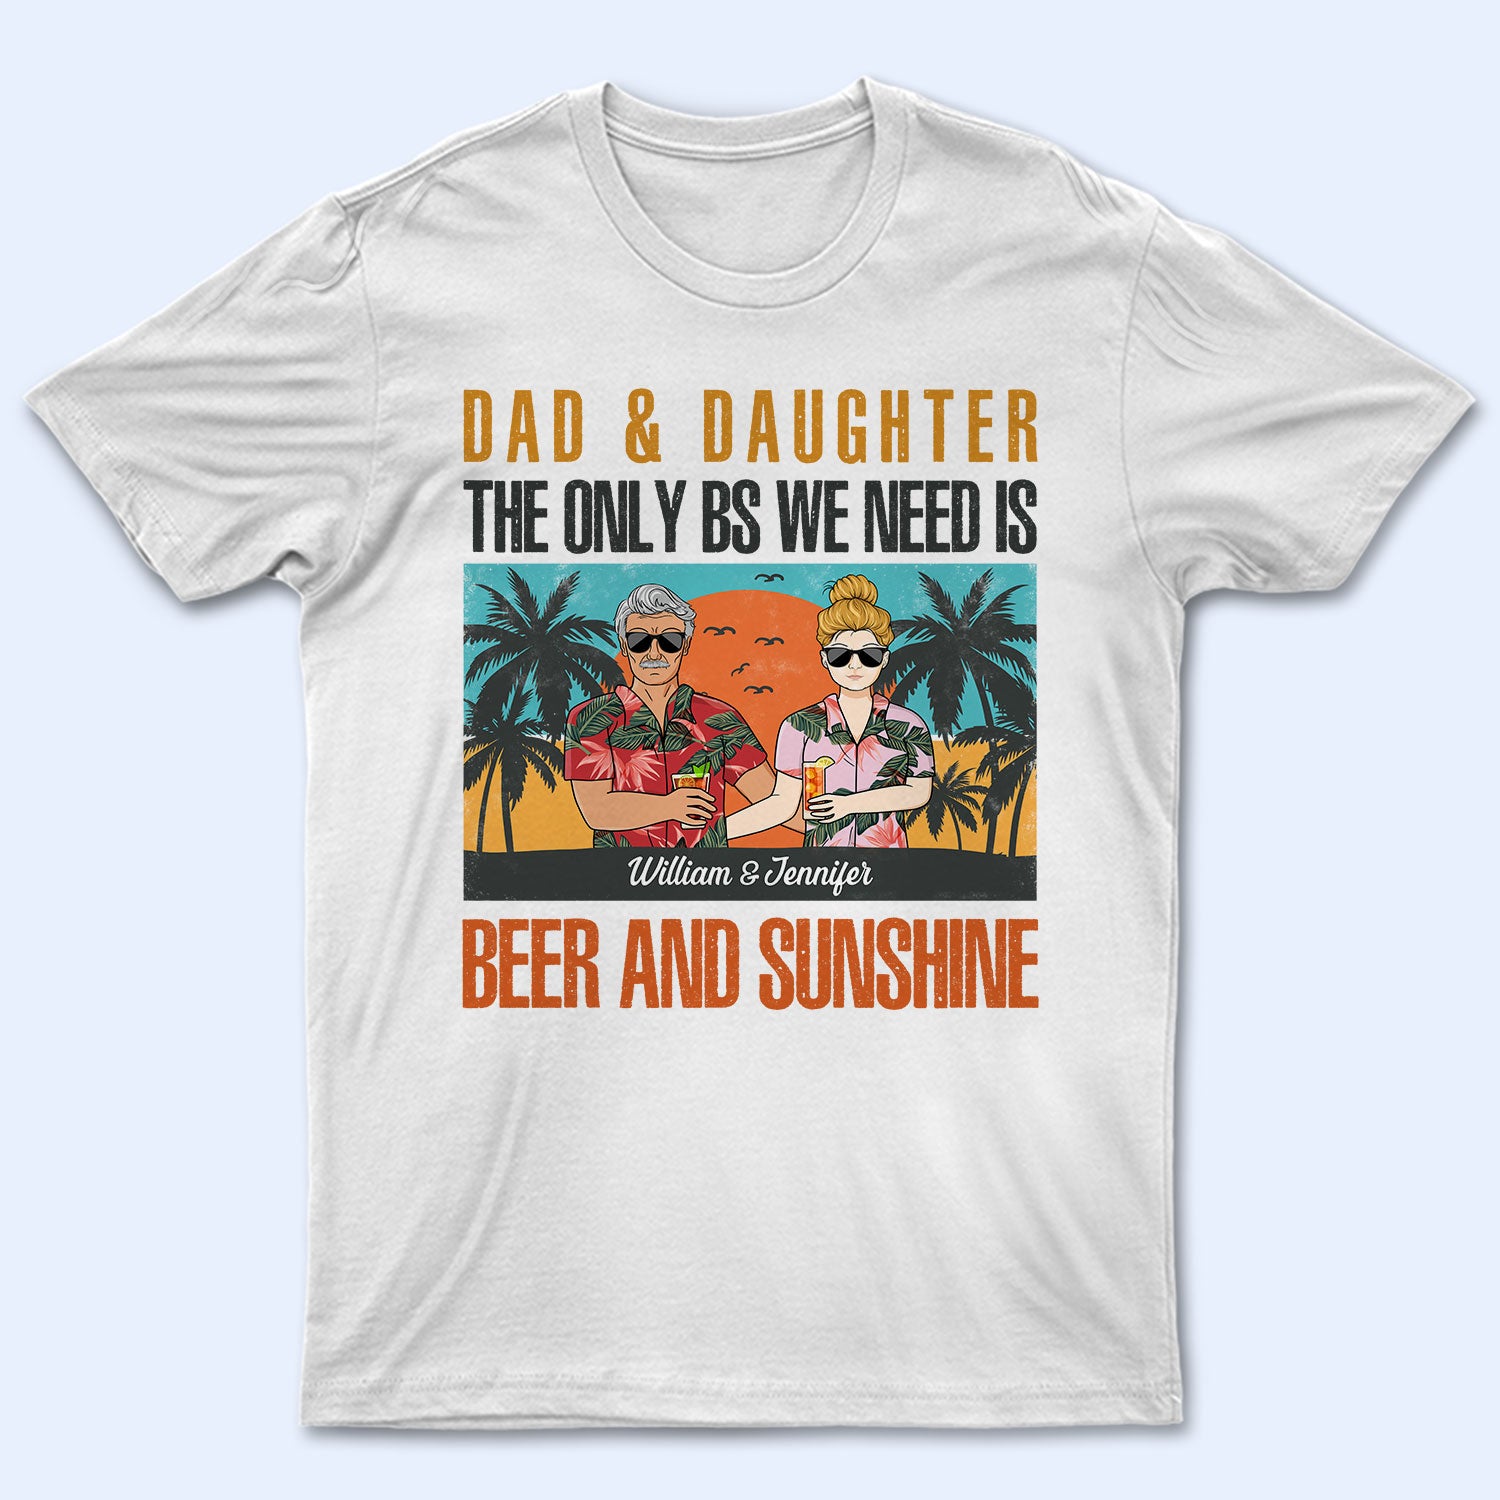 The Only Bs I Need Is Beer And Sunshine - Gift For Father, Daughter - Personalized Custom T Shirt